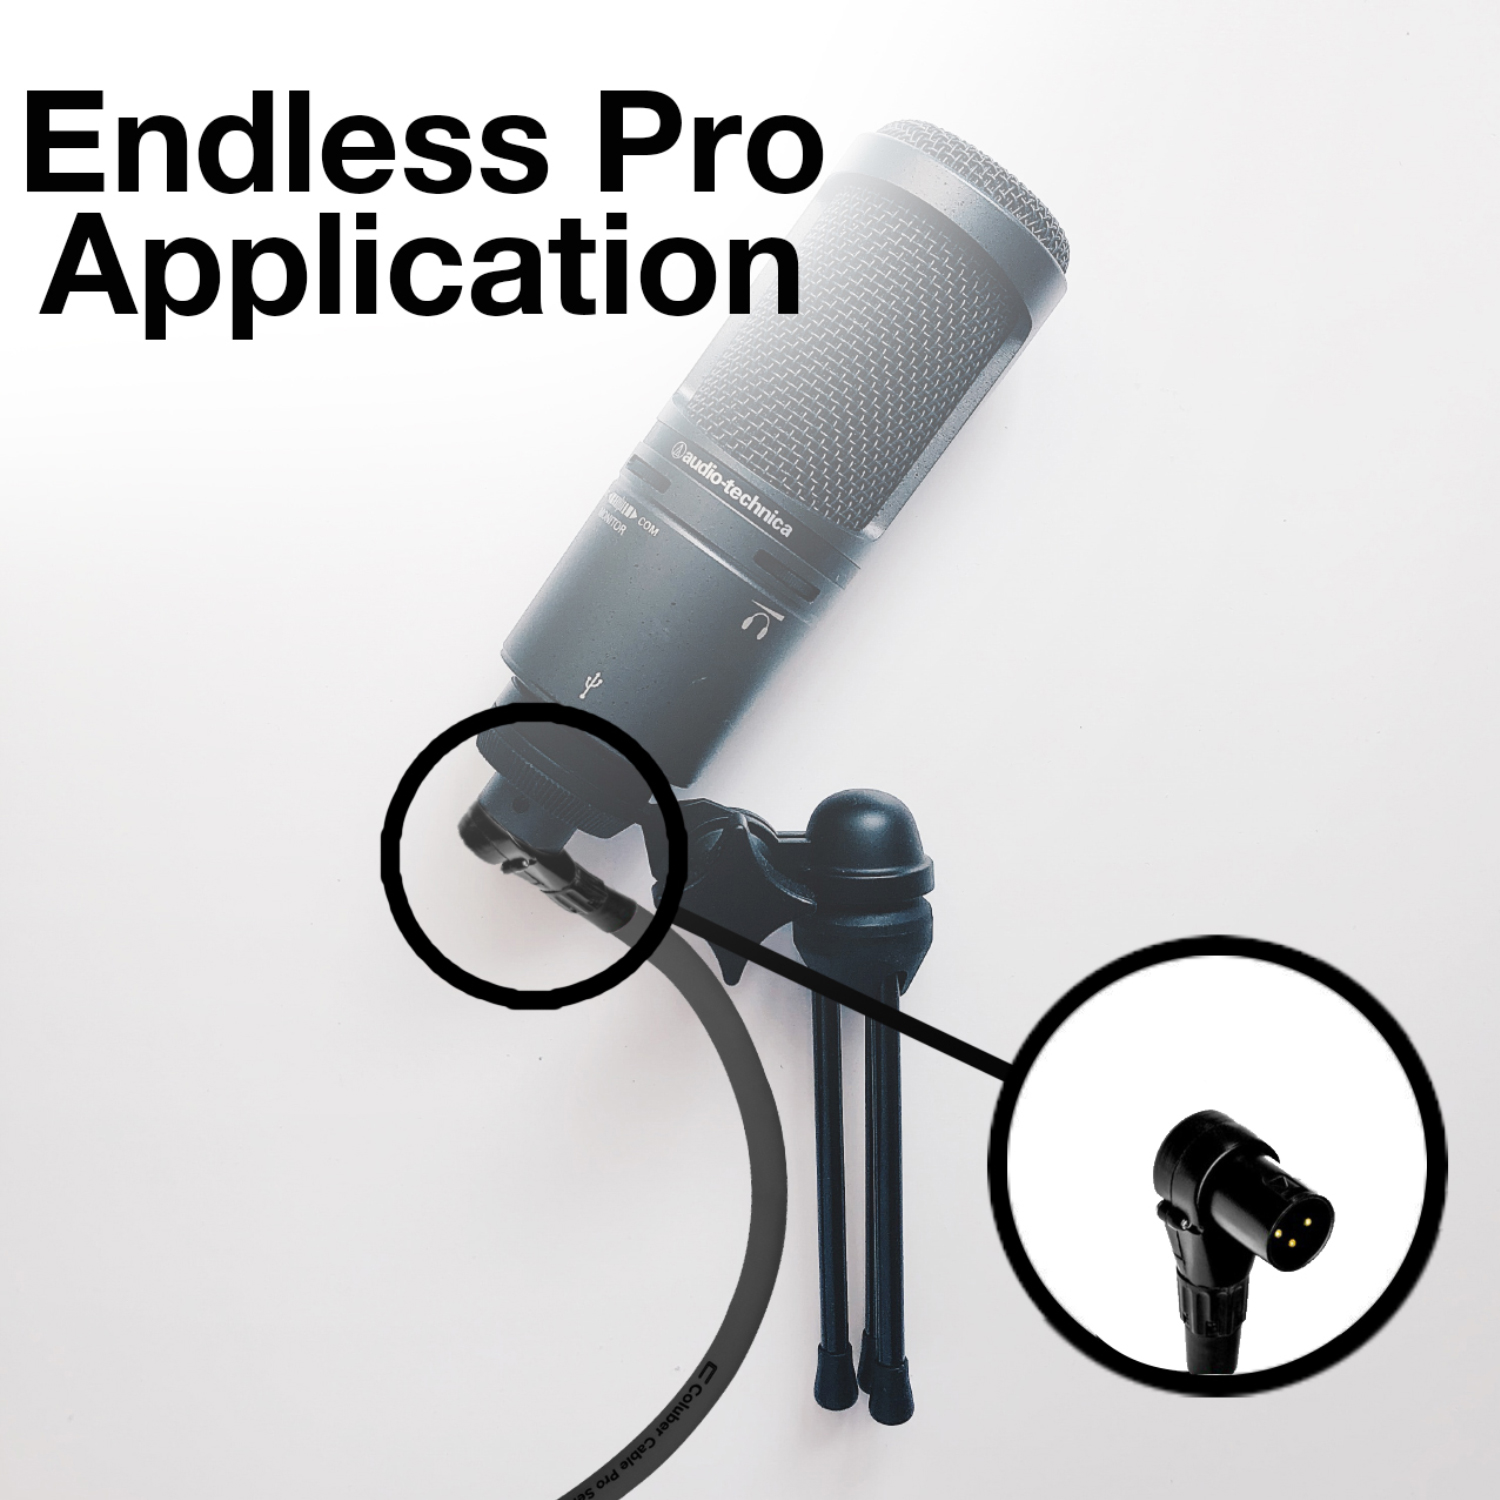 Right Angle XLR Male to 1/4" TRS Male - 1.5 Feet - White - Pro 3-Pin Microphone Connector for Powered Speakers, Audio Interface or Mixer for Live Performance & Recording - image 5 of 7